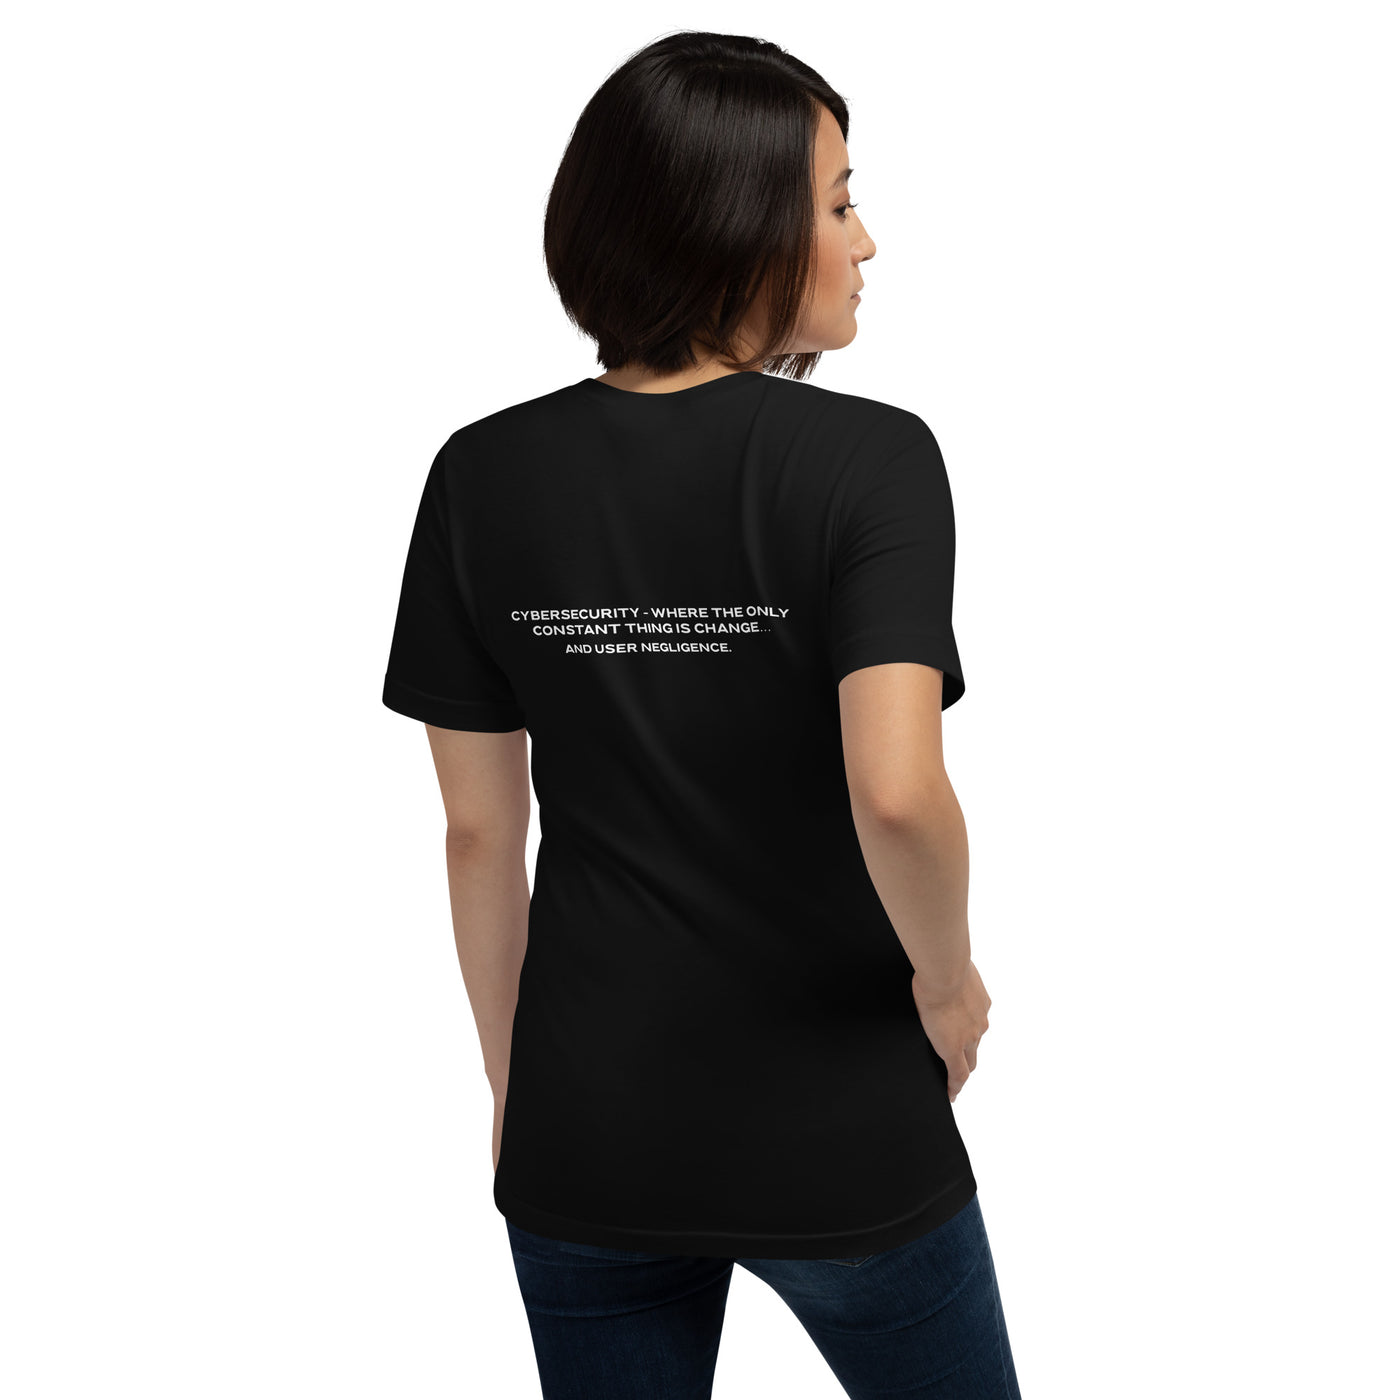 Cybersecurity where the only constant thing is change and user negligence V2 - Unisex t-shirt ( Back Print )